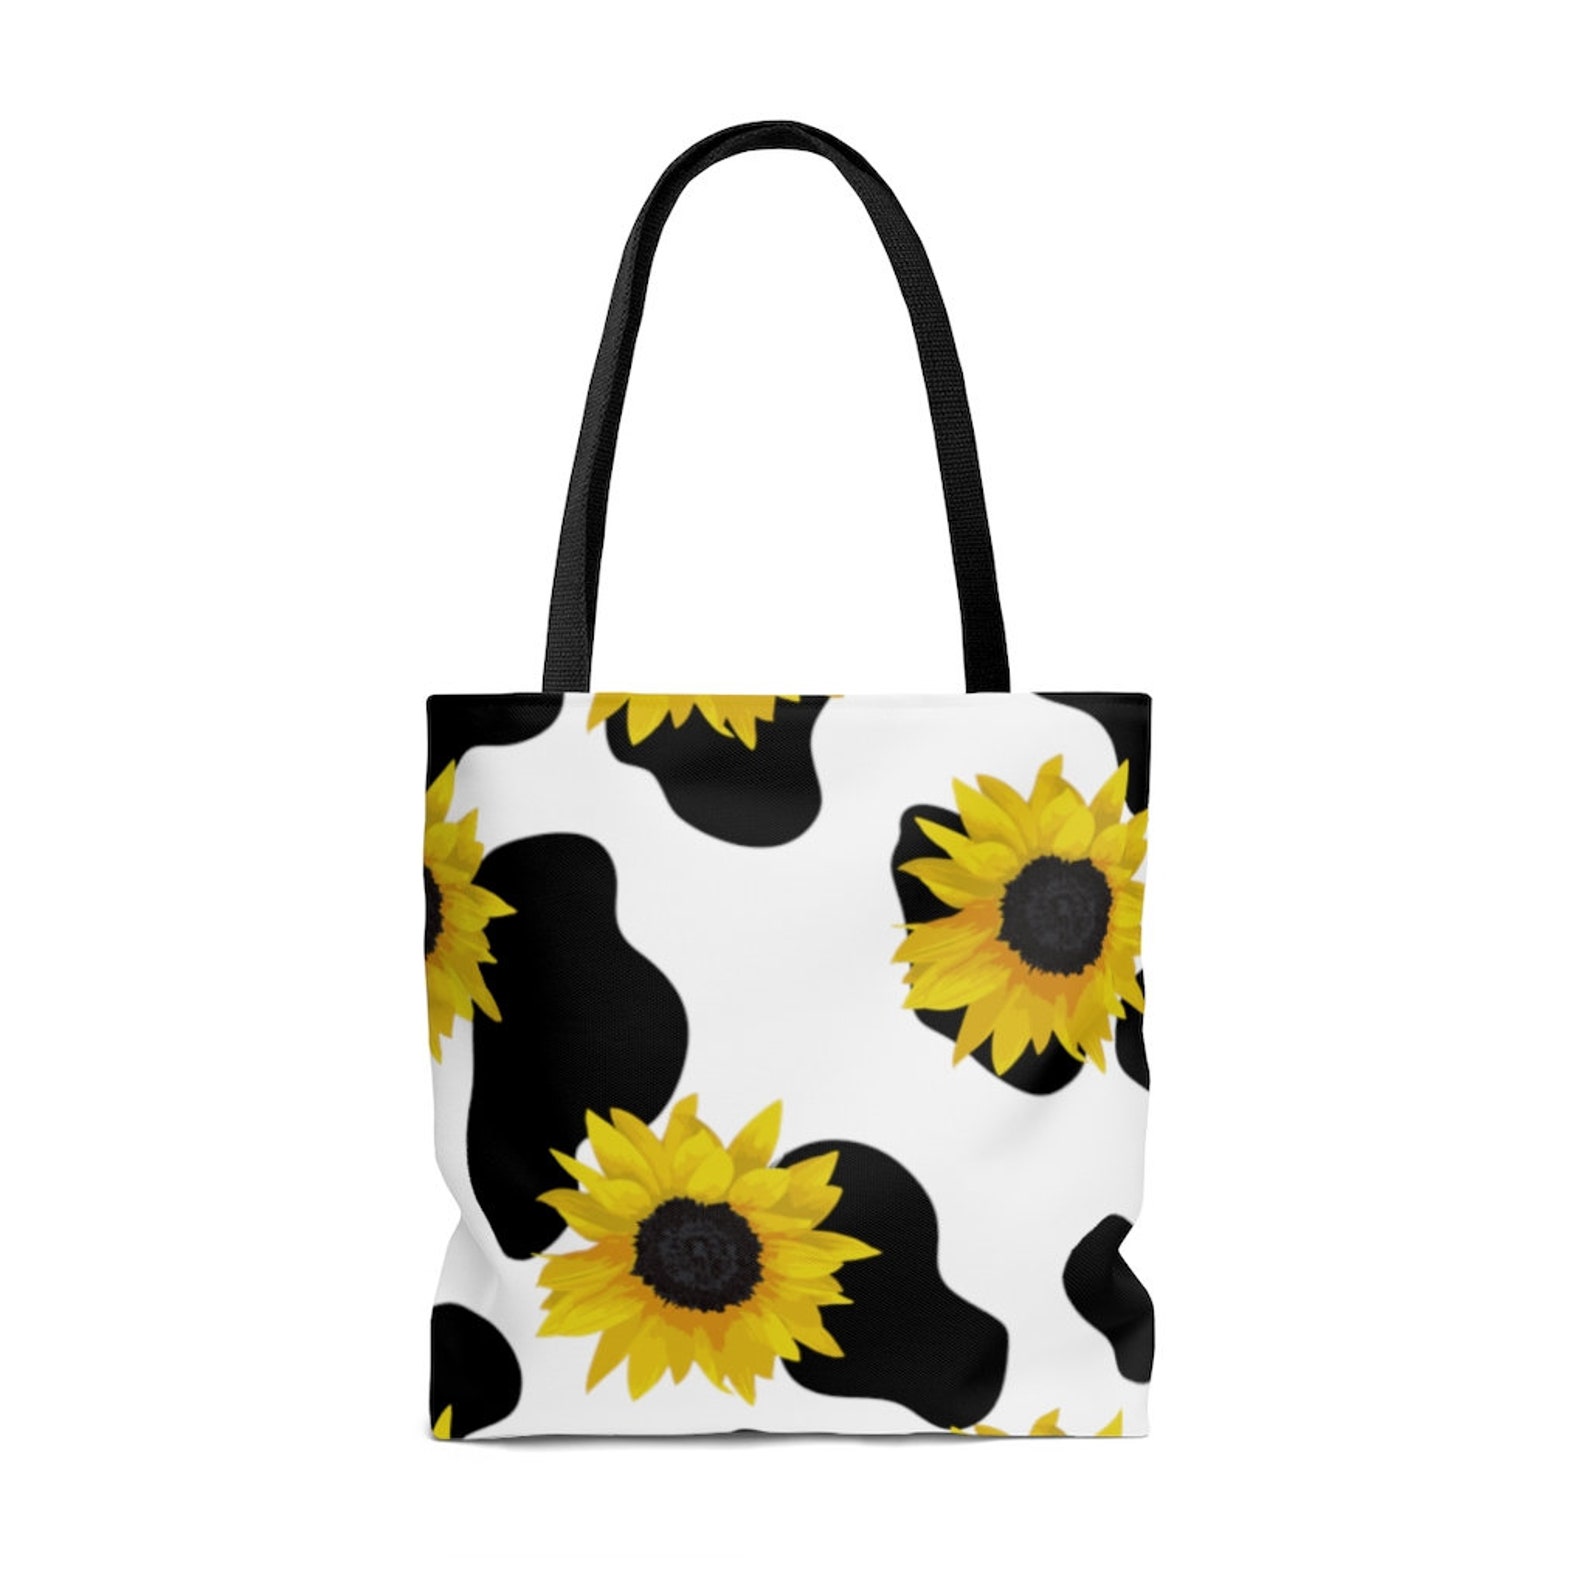 Cow Print Tote Sunflower Tote Cow Print and Sunflower Tote | Etsy